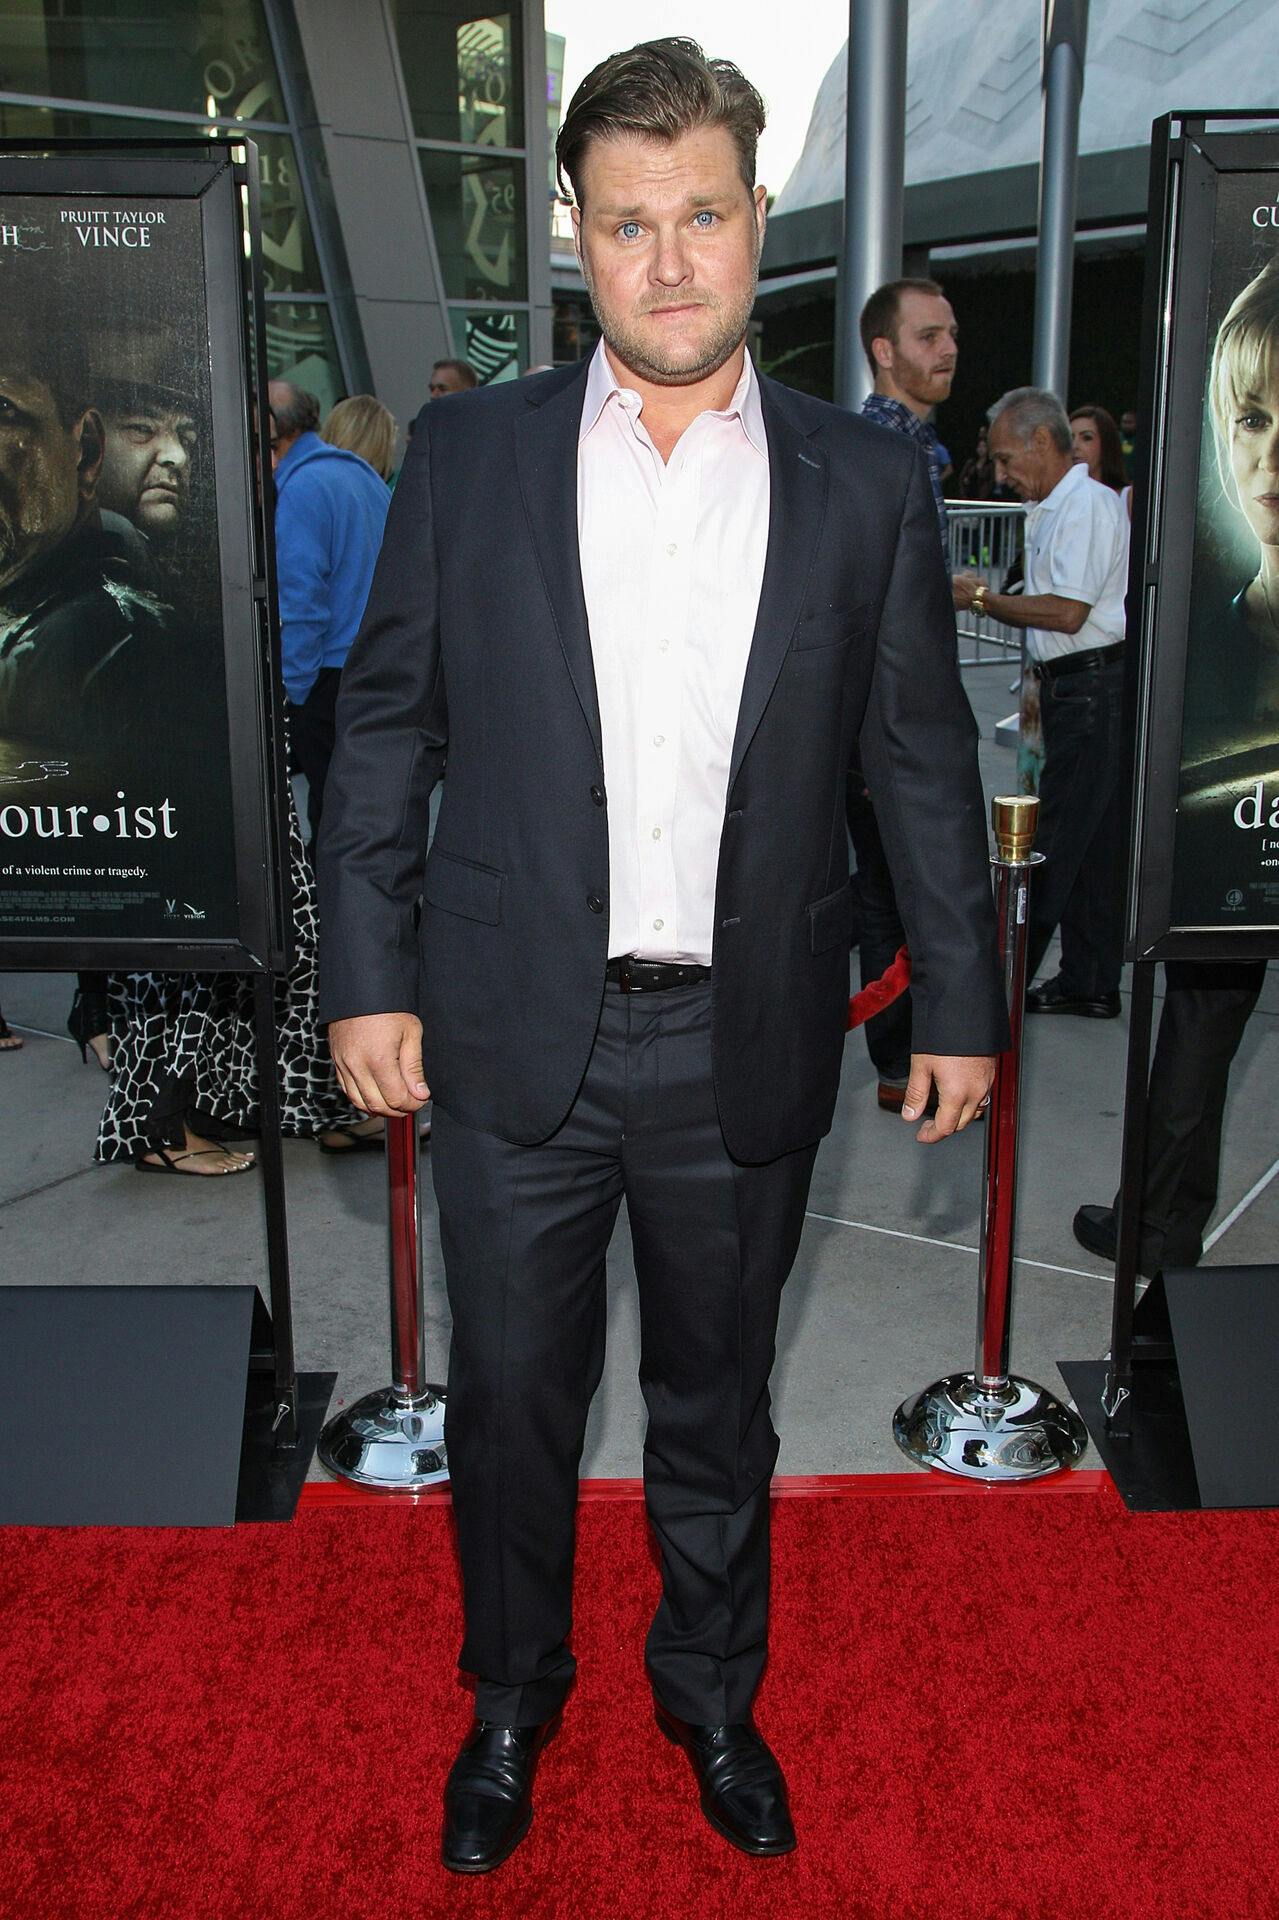 Actress Zachery Ty Bryan arrives at the premiere of "Dark Tourist" at the ArcLight Cinemas on Thursday, August 14, 2013 in Los Angeles. (Photo by Paul A. Hebert/Invision/AP)